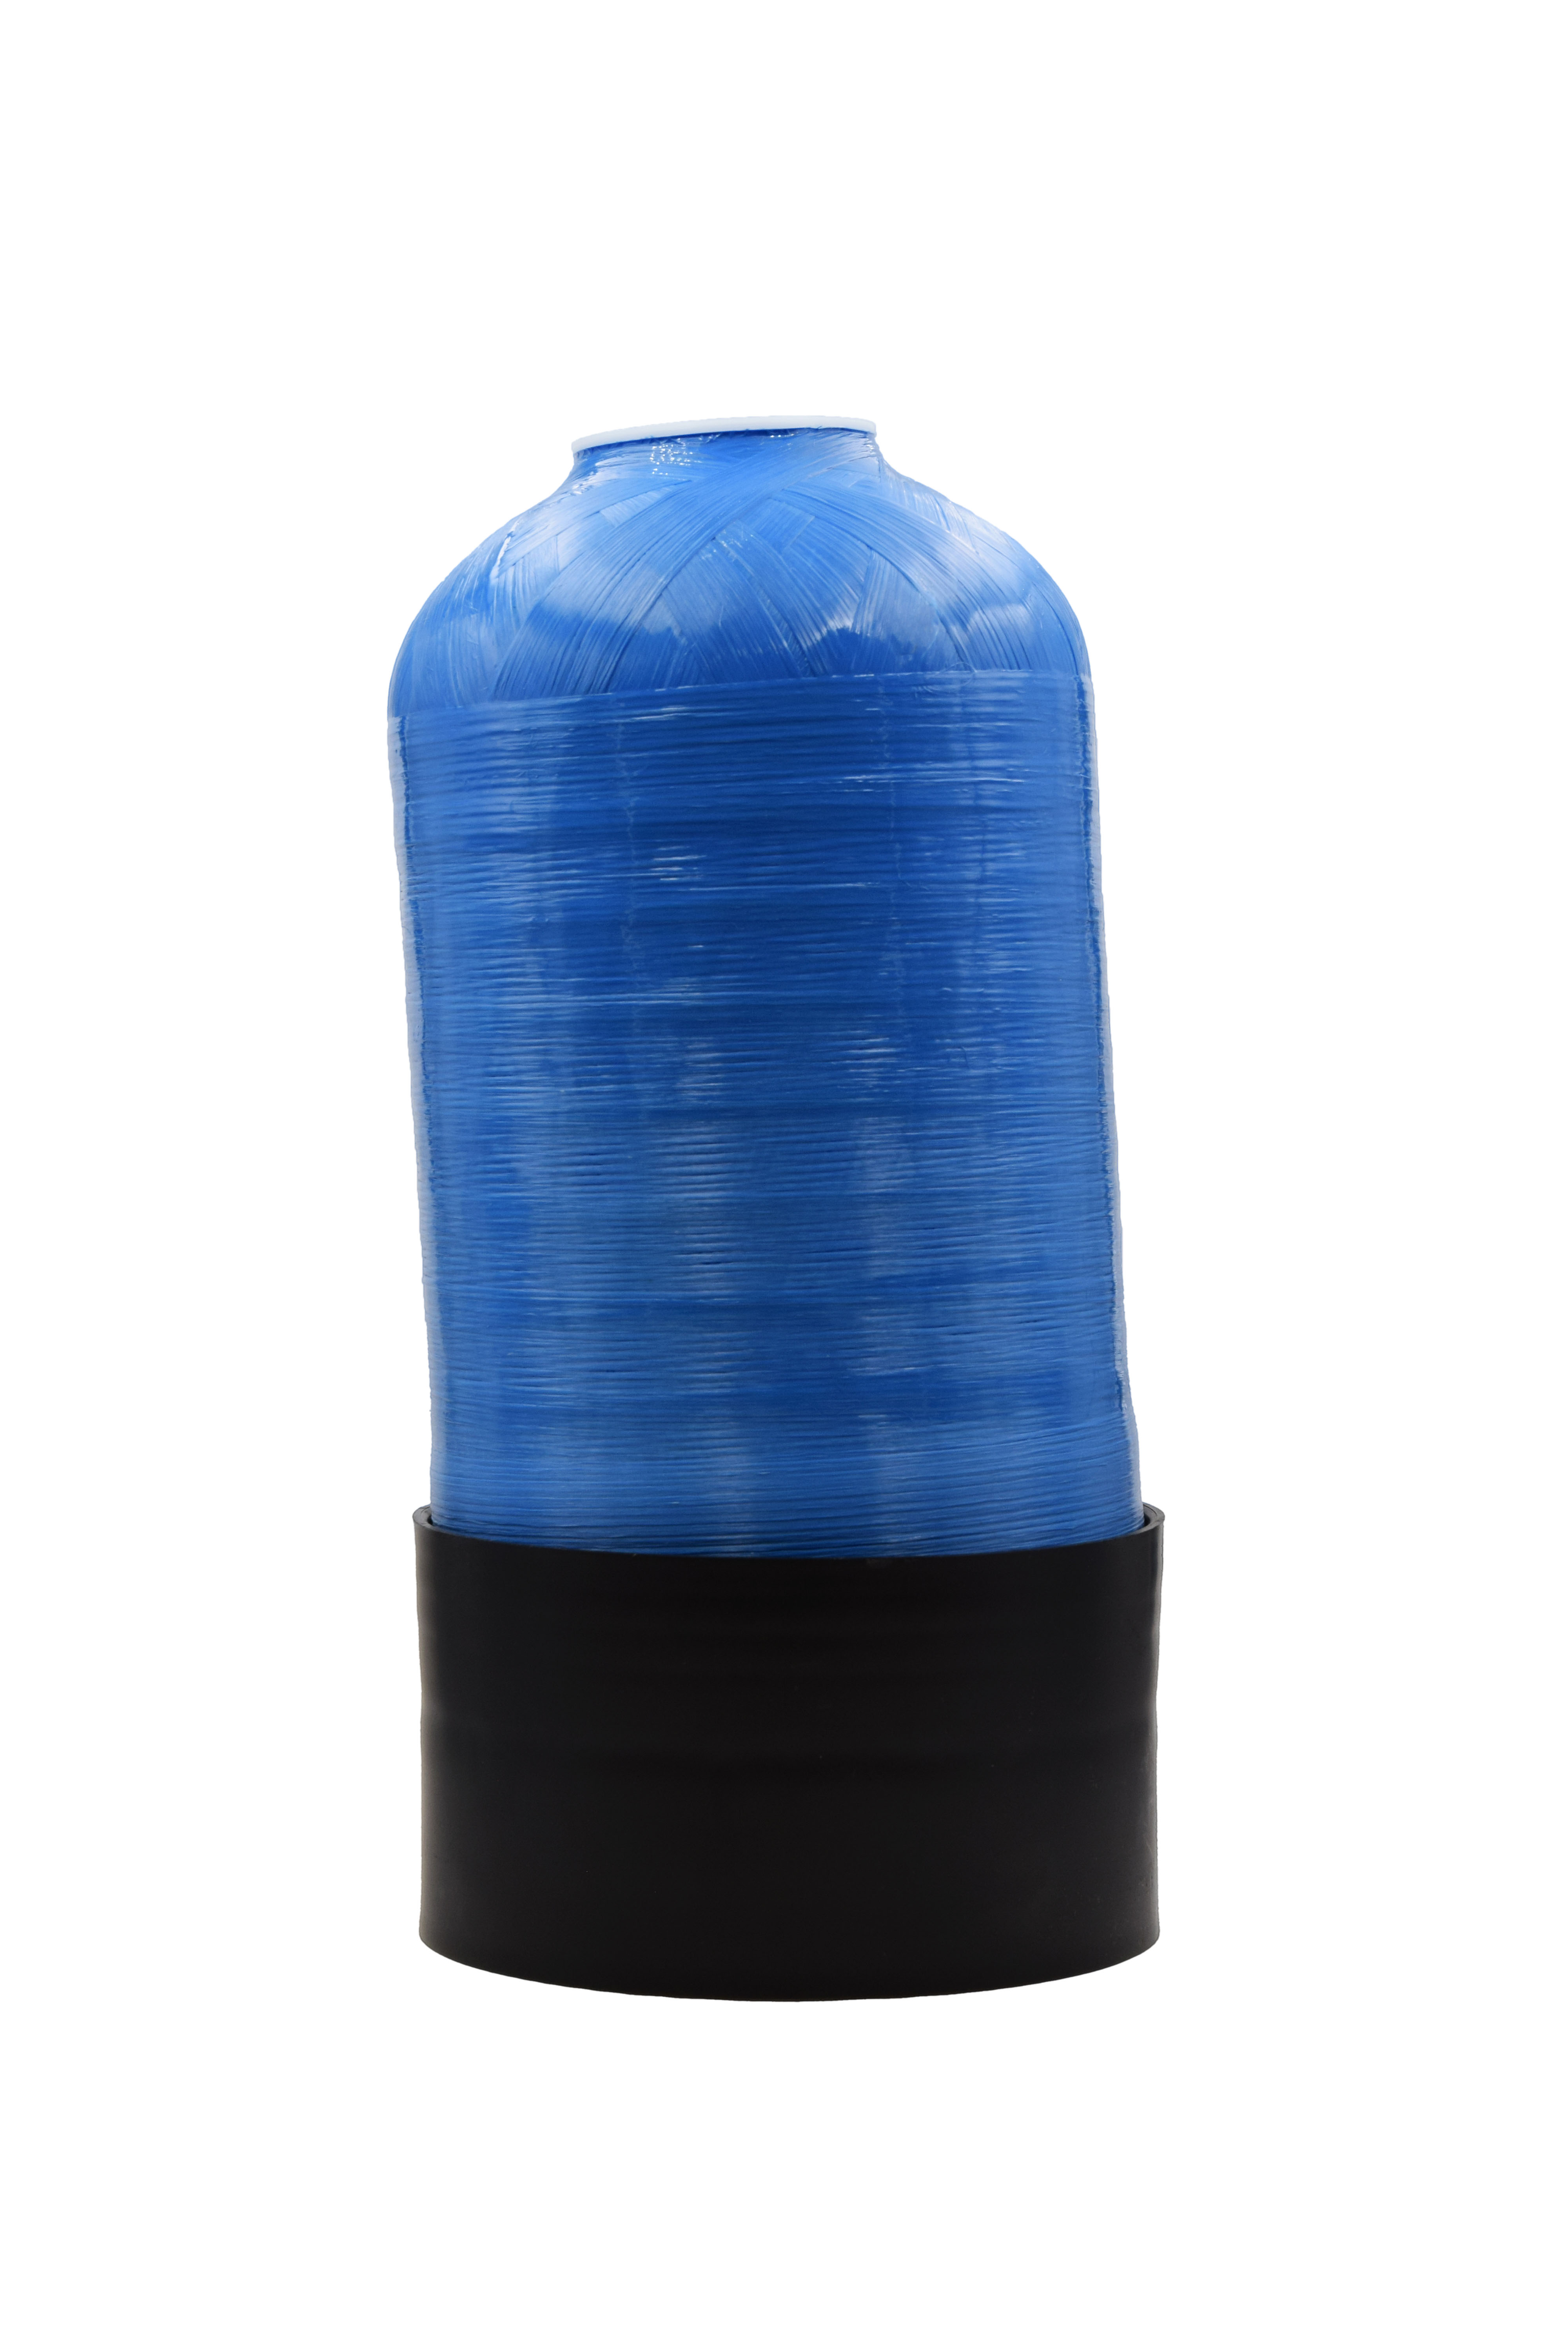 50 Liter Plastic Mixed Bed Demineralization Cartridge Filled with Premium Resin